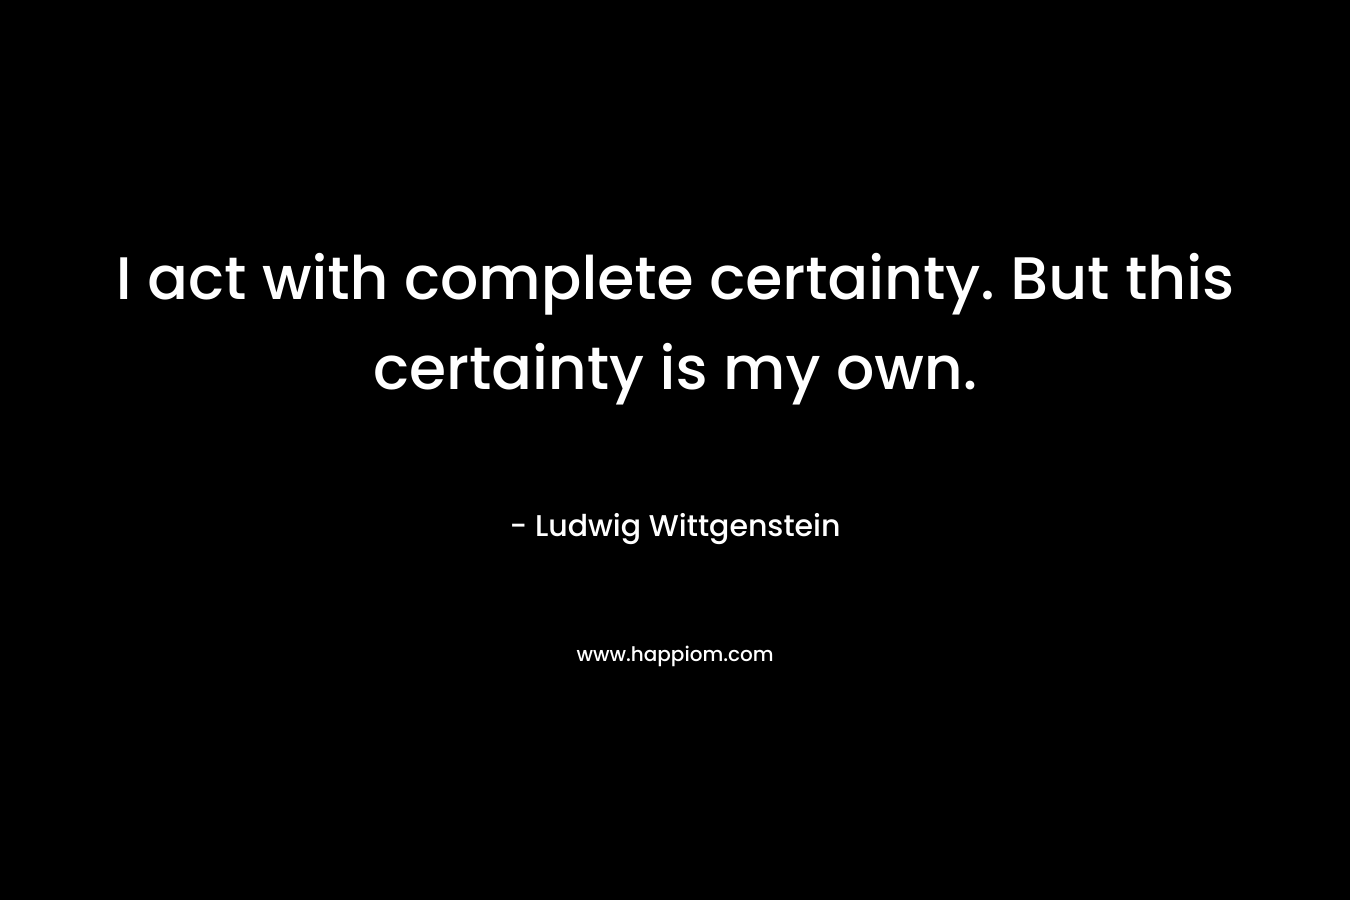 I act with complete certainty. But this certainty is my own. – Ludwig Wittgenstein